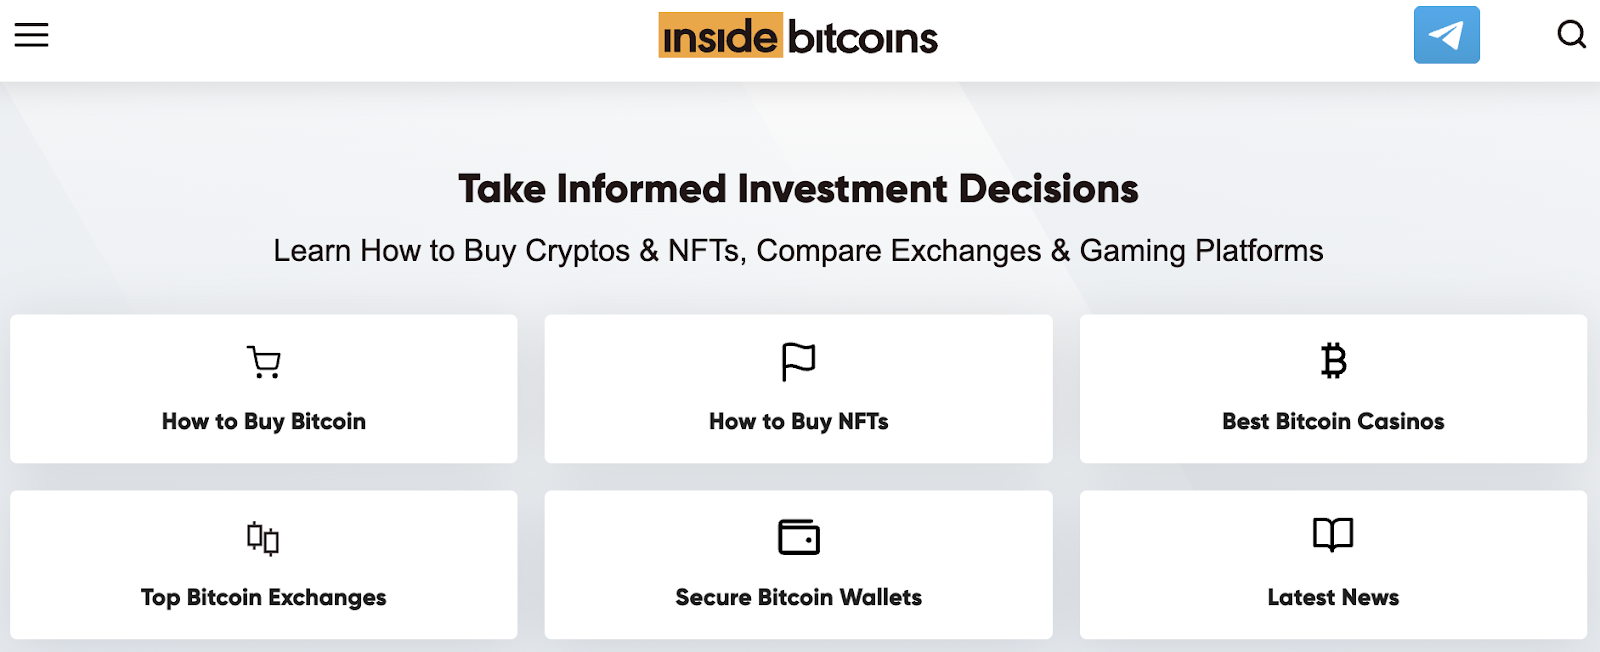 InsideBitcoins Review - Best Platform To Catch Up on Crypto News?